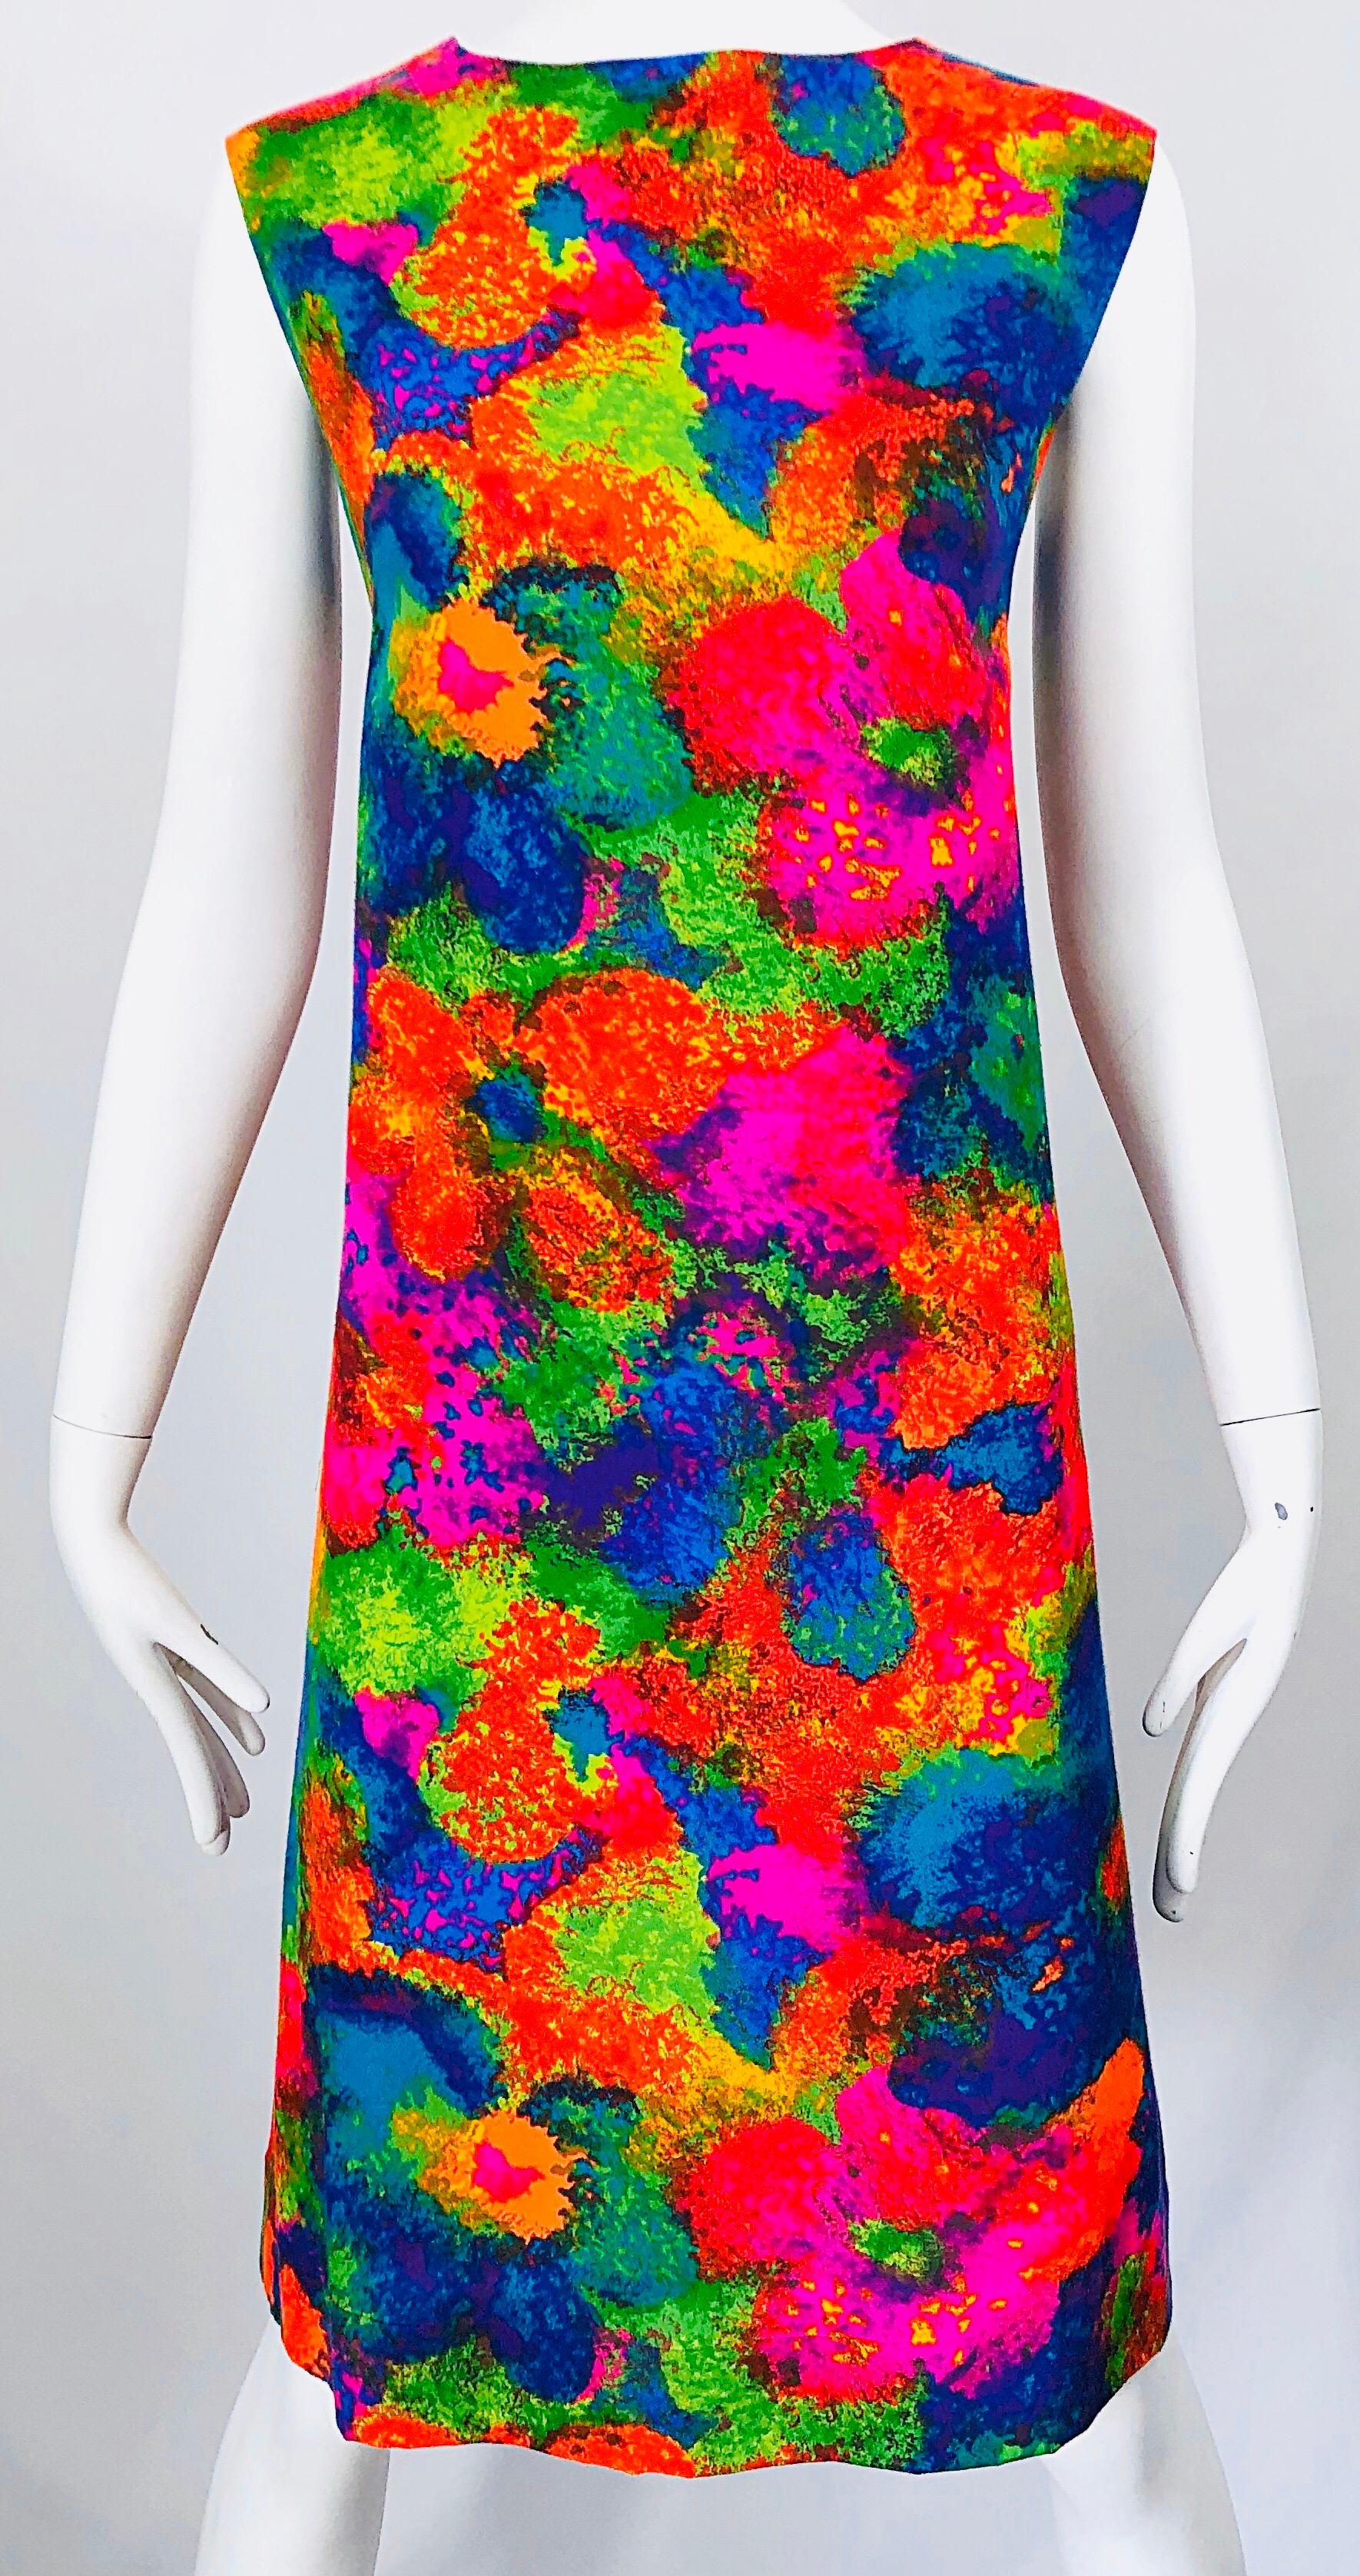 Chic 1960s Larger Size Neon Abstract Flower Print Vintage 60s Cotton Shift Dress In Excellent Condition For Sale In San Diego, CA